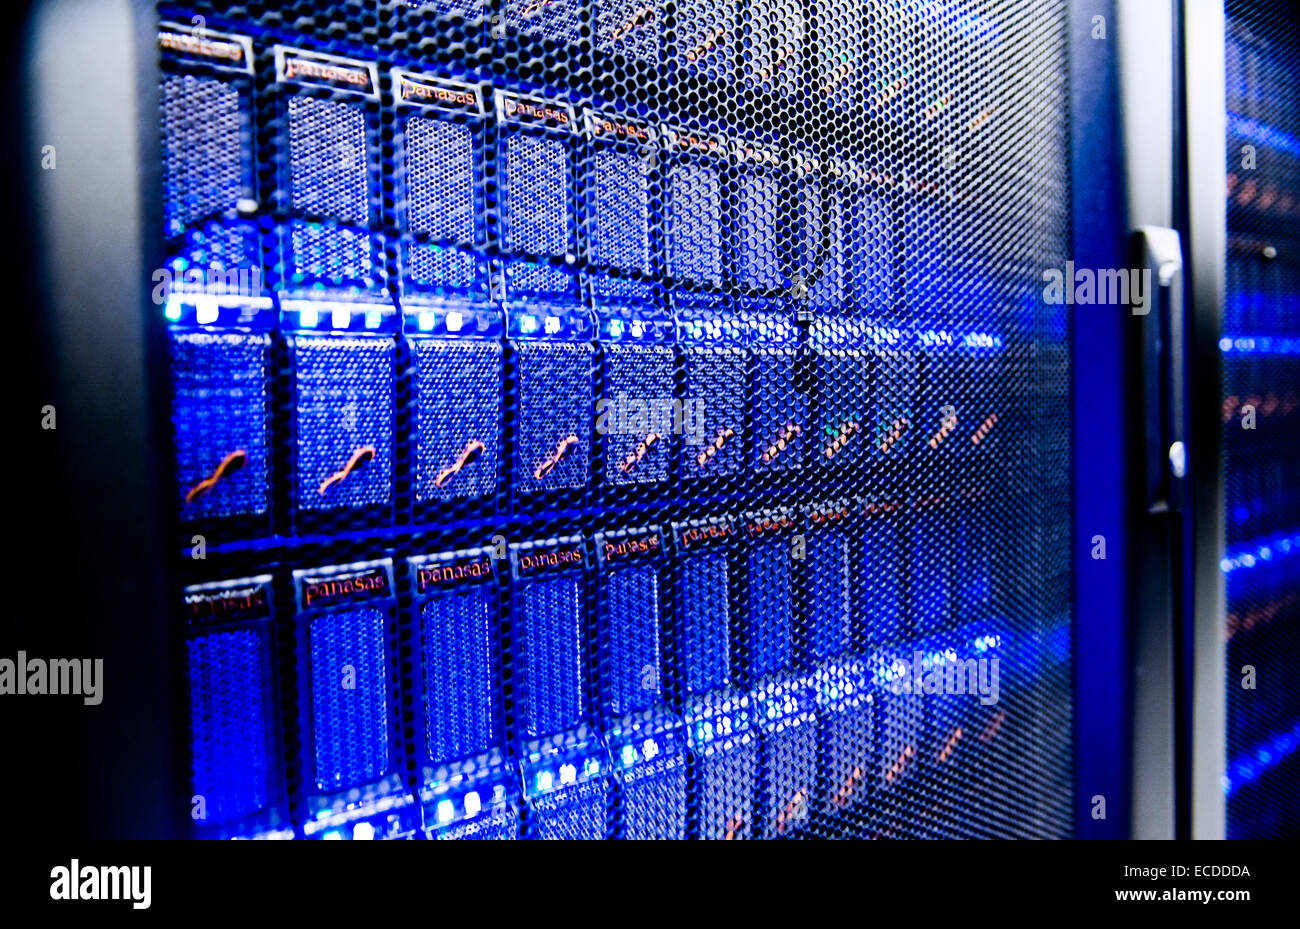 Banks of rack mounted computer servers at Rutherford Appleton Laboratories, Harwell, Oxfordshire, UK Stock Photo